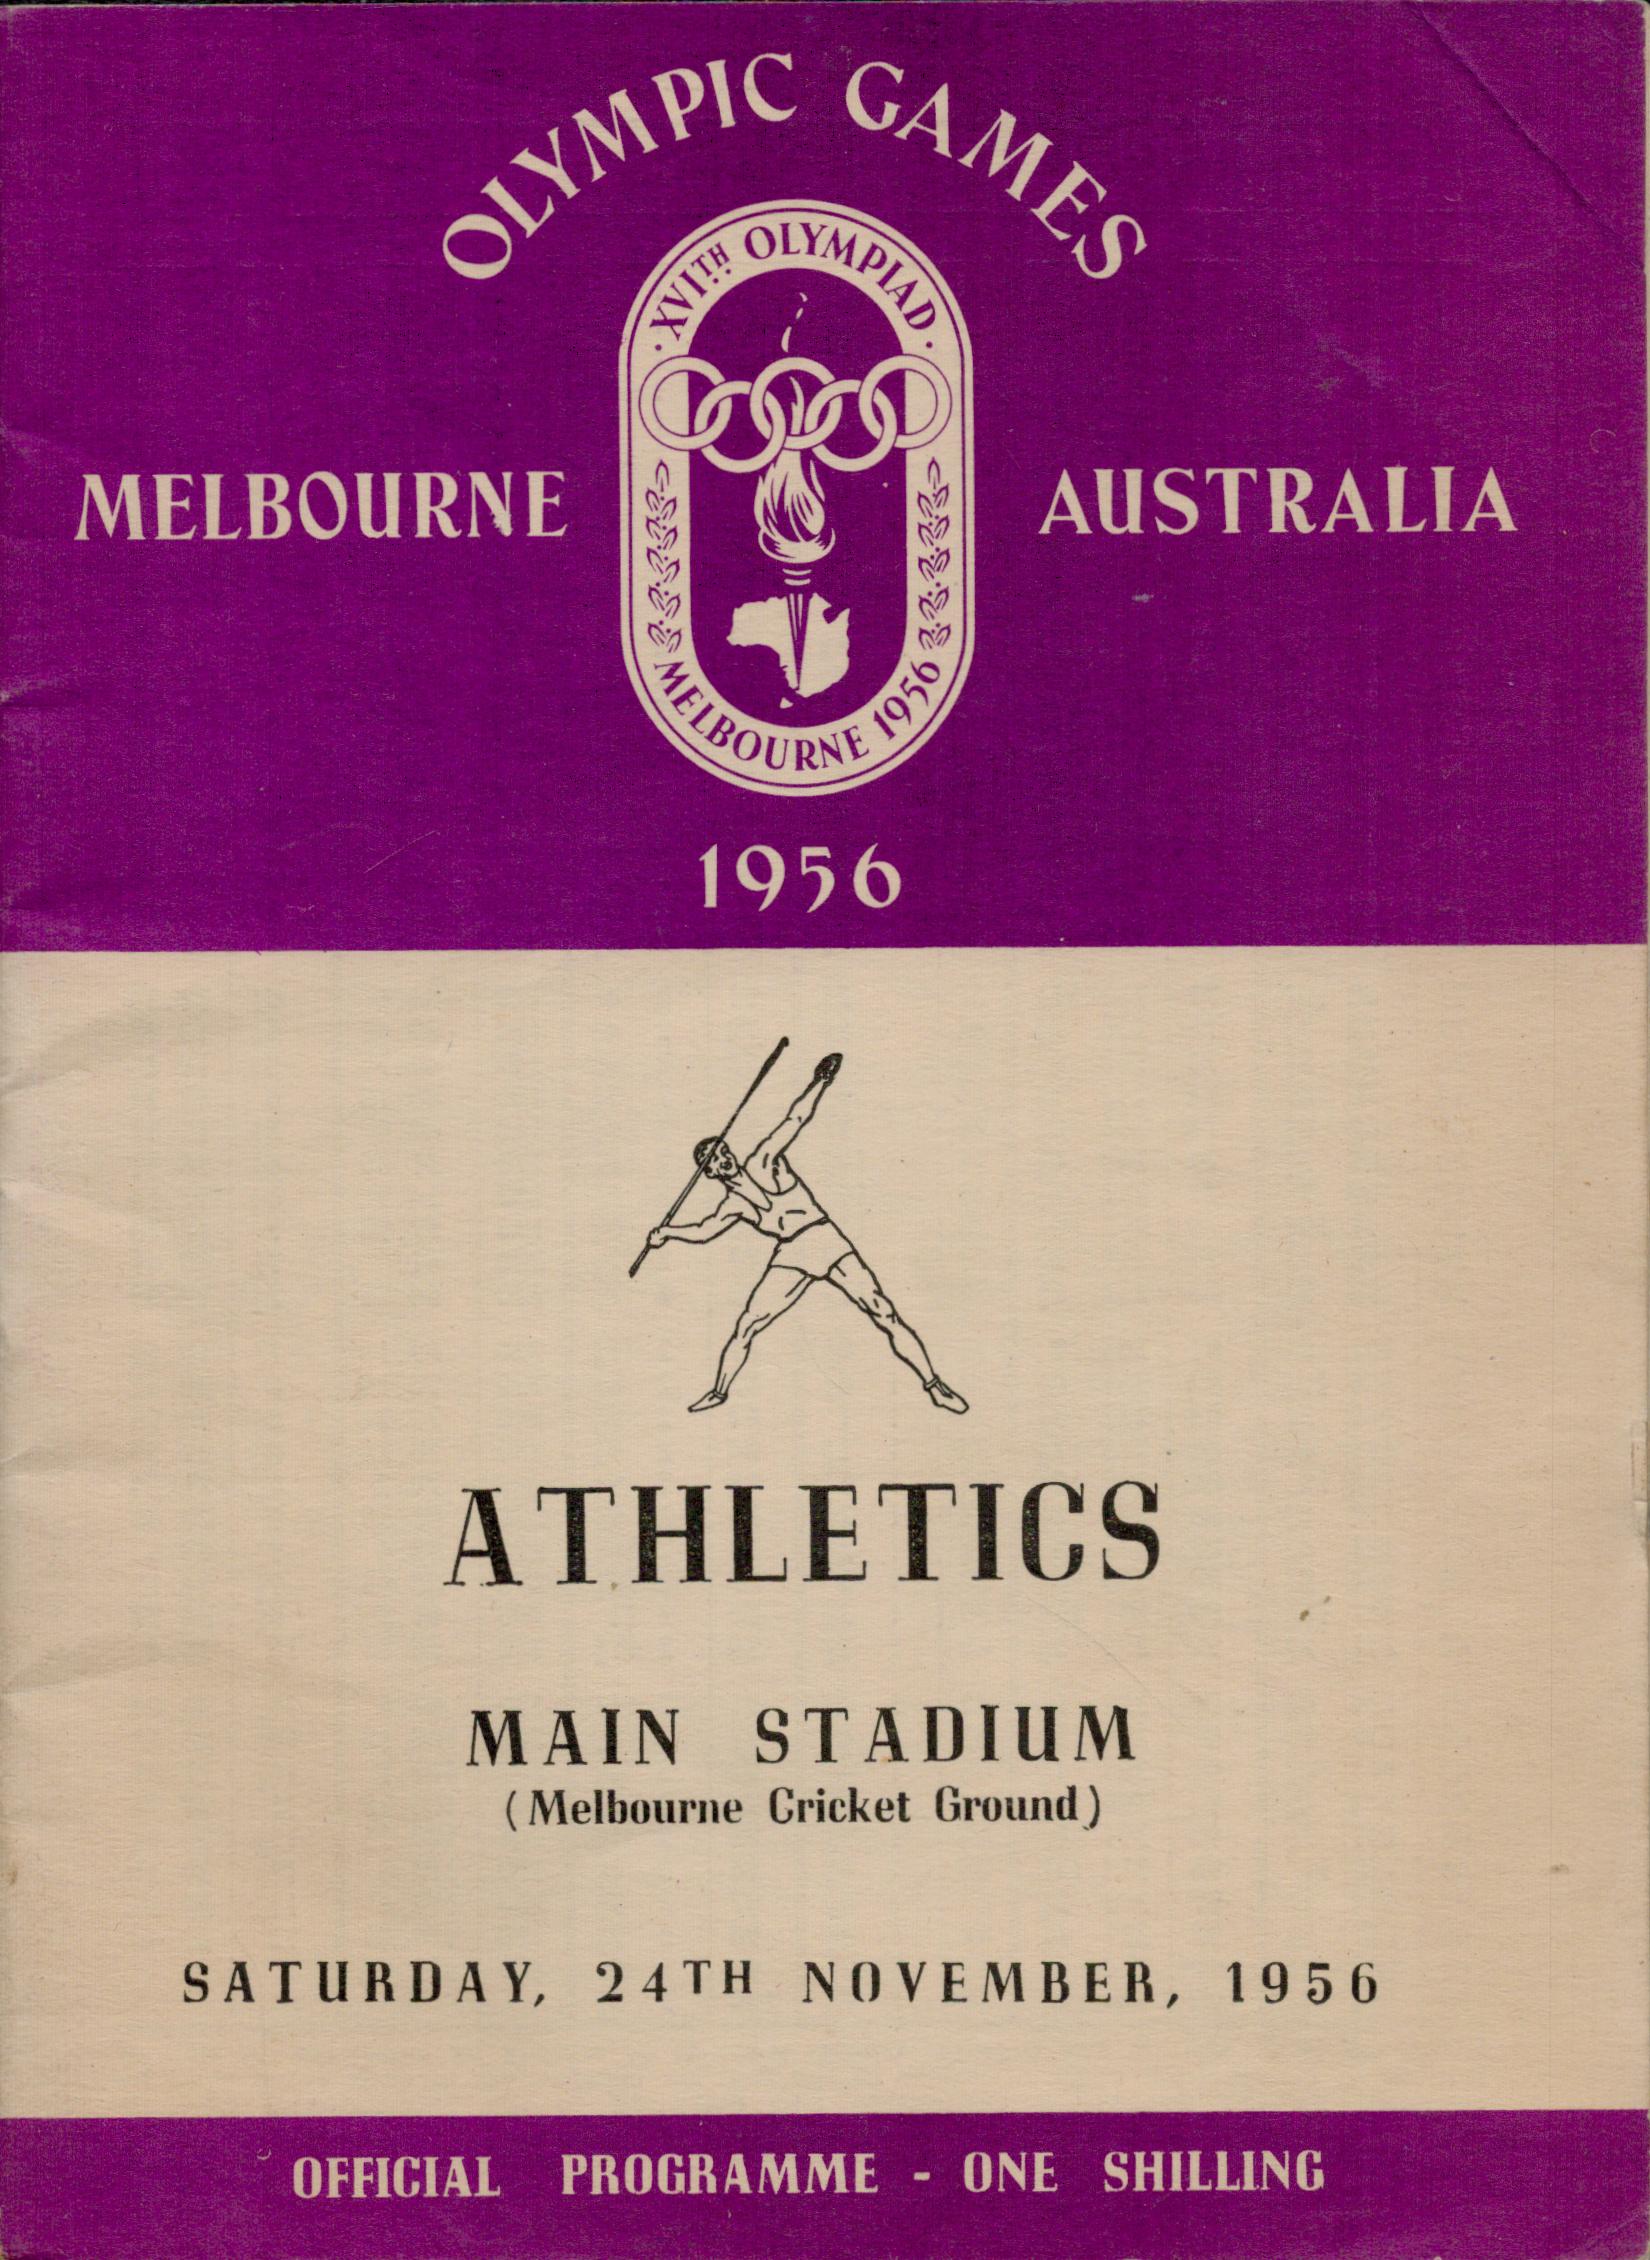 Vintage unsigned Olympic Games Melbourne Australia Official Programme - One Shilling. Athletics Main